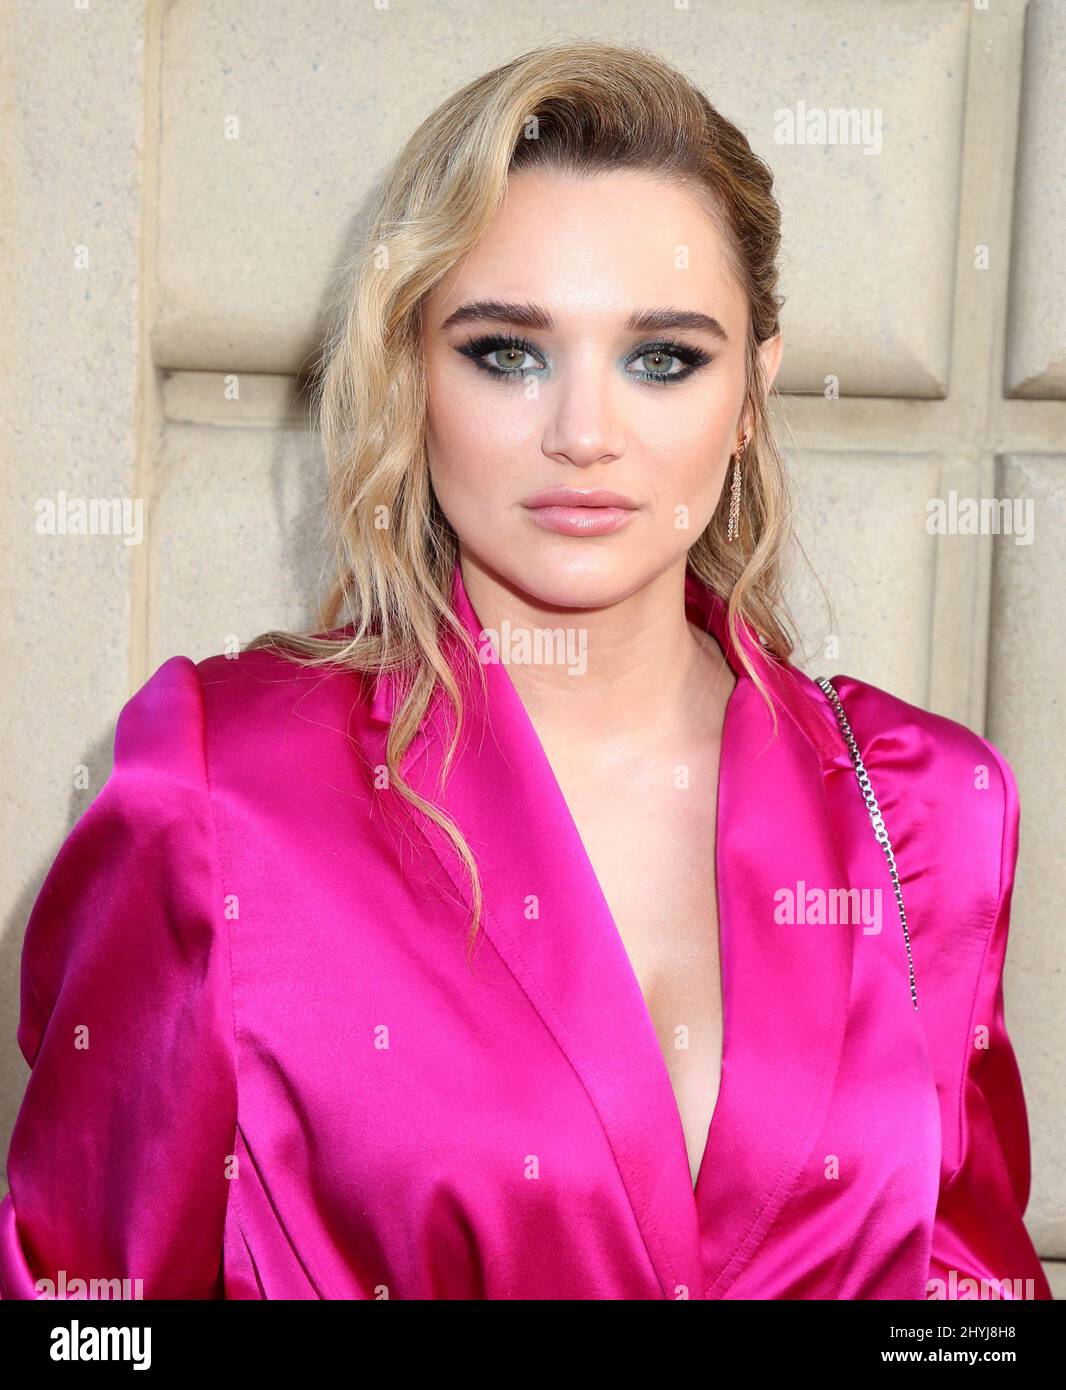 Hunter King attending the 46th Annual Daytime Creative Arts Emmy Awards held at the Pasadena Civic Center Stock Photo